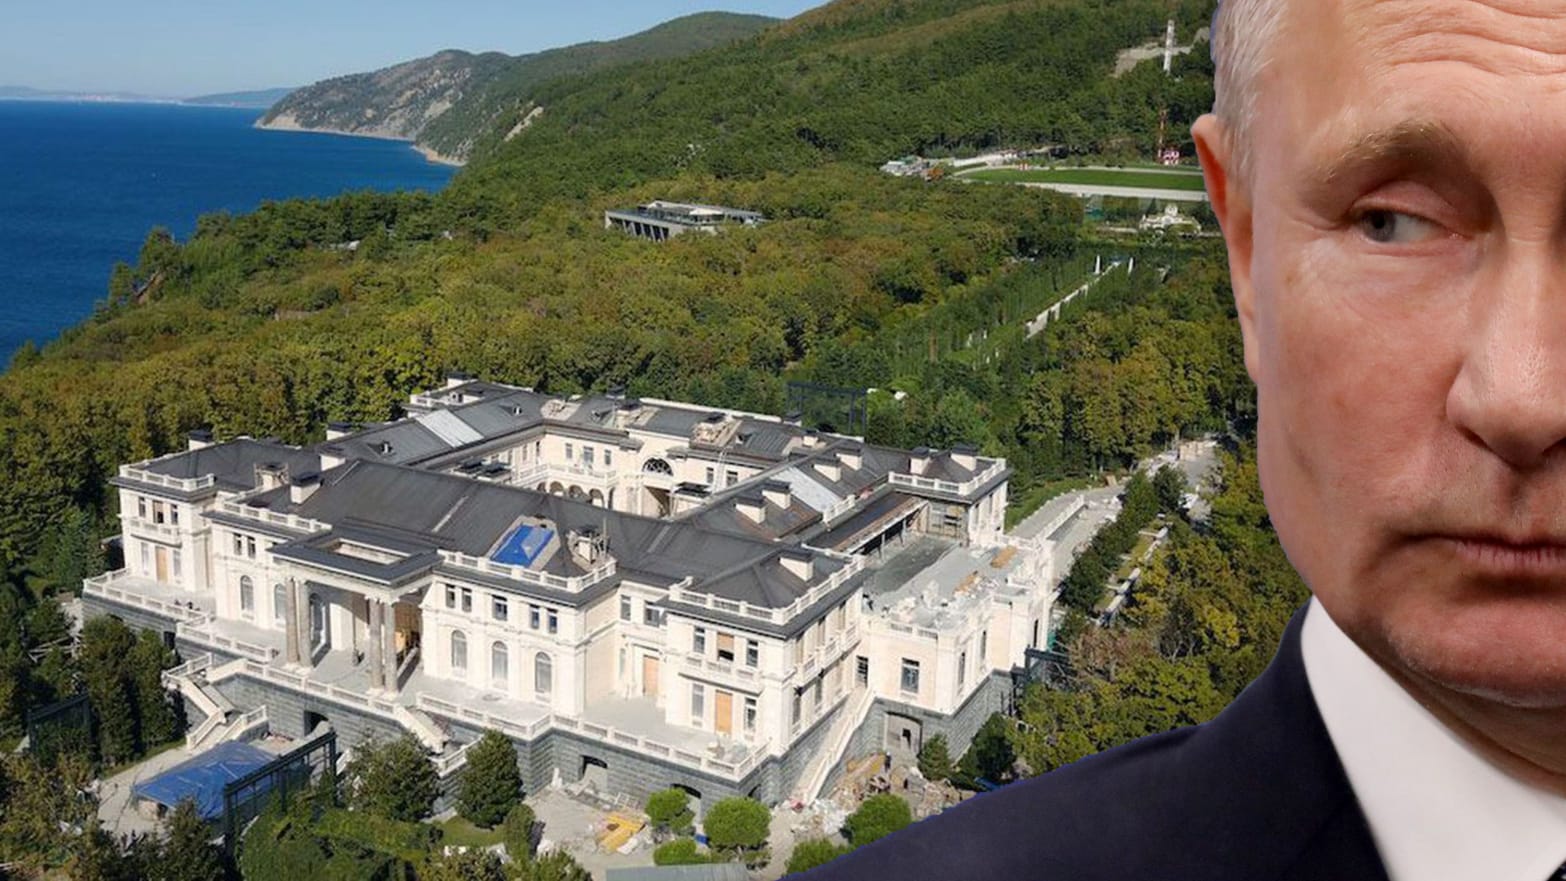 Putins Vacation Retreat Inflamed Protesters, So Putin Denies Owning the Billion-Dollar Palace